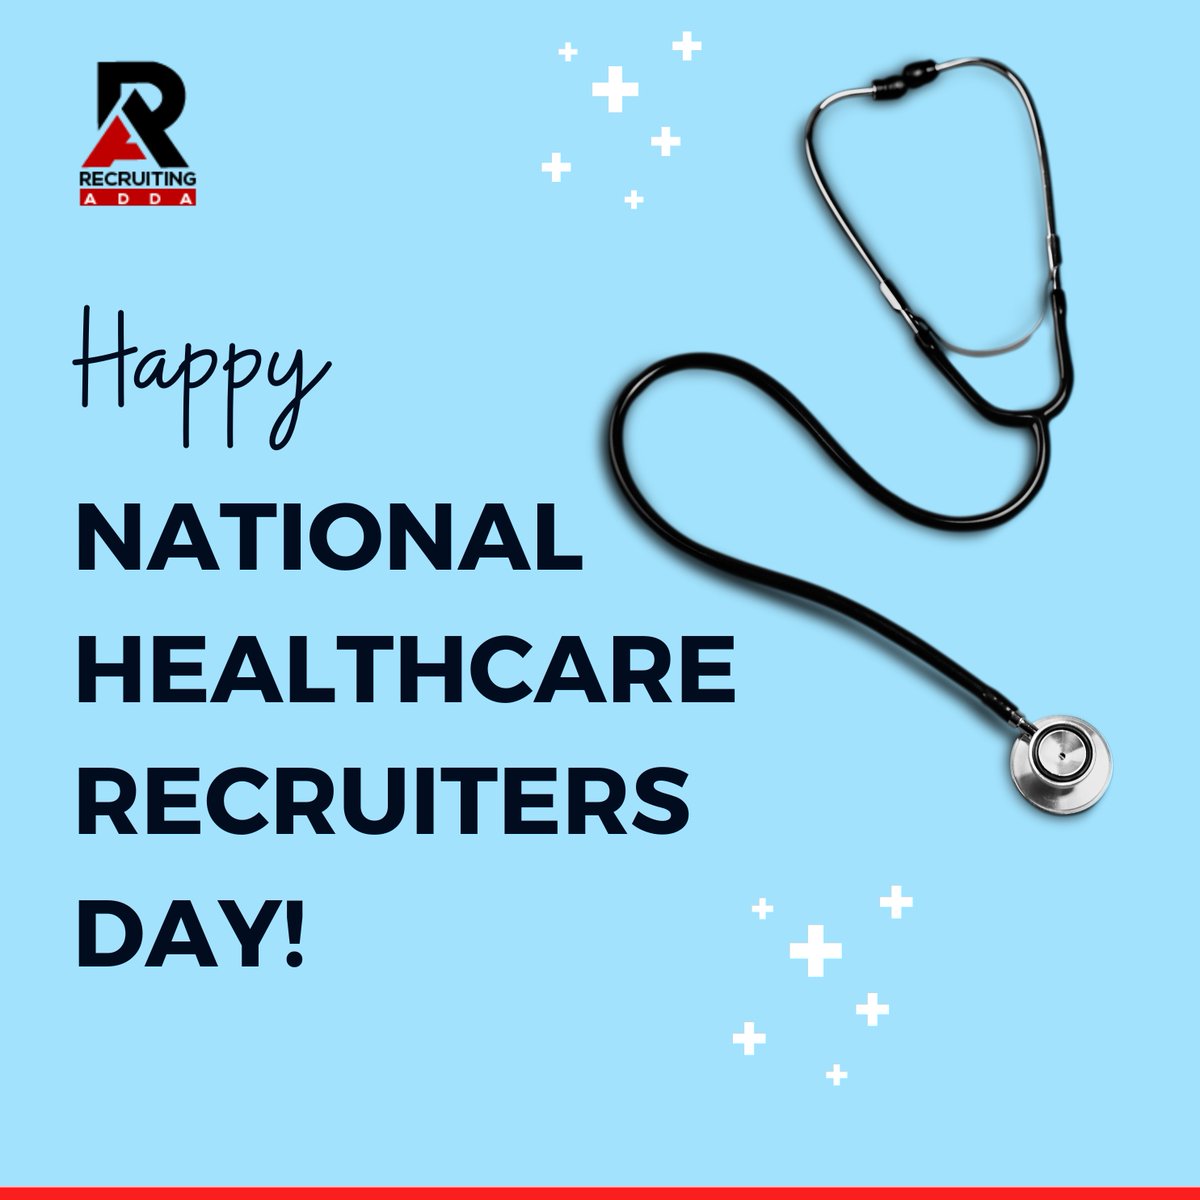 We appreciate your commitment to the profession in ensuring that our healthcare system is filled with competent & qualified staff always Wishing you a Happy National Healthcare Recruiters Day! #sourcingadda #recruitingadda #nationalhealthcarerecruitersday2023 #healthcarerecruiter